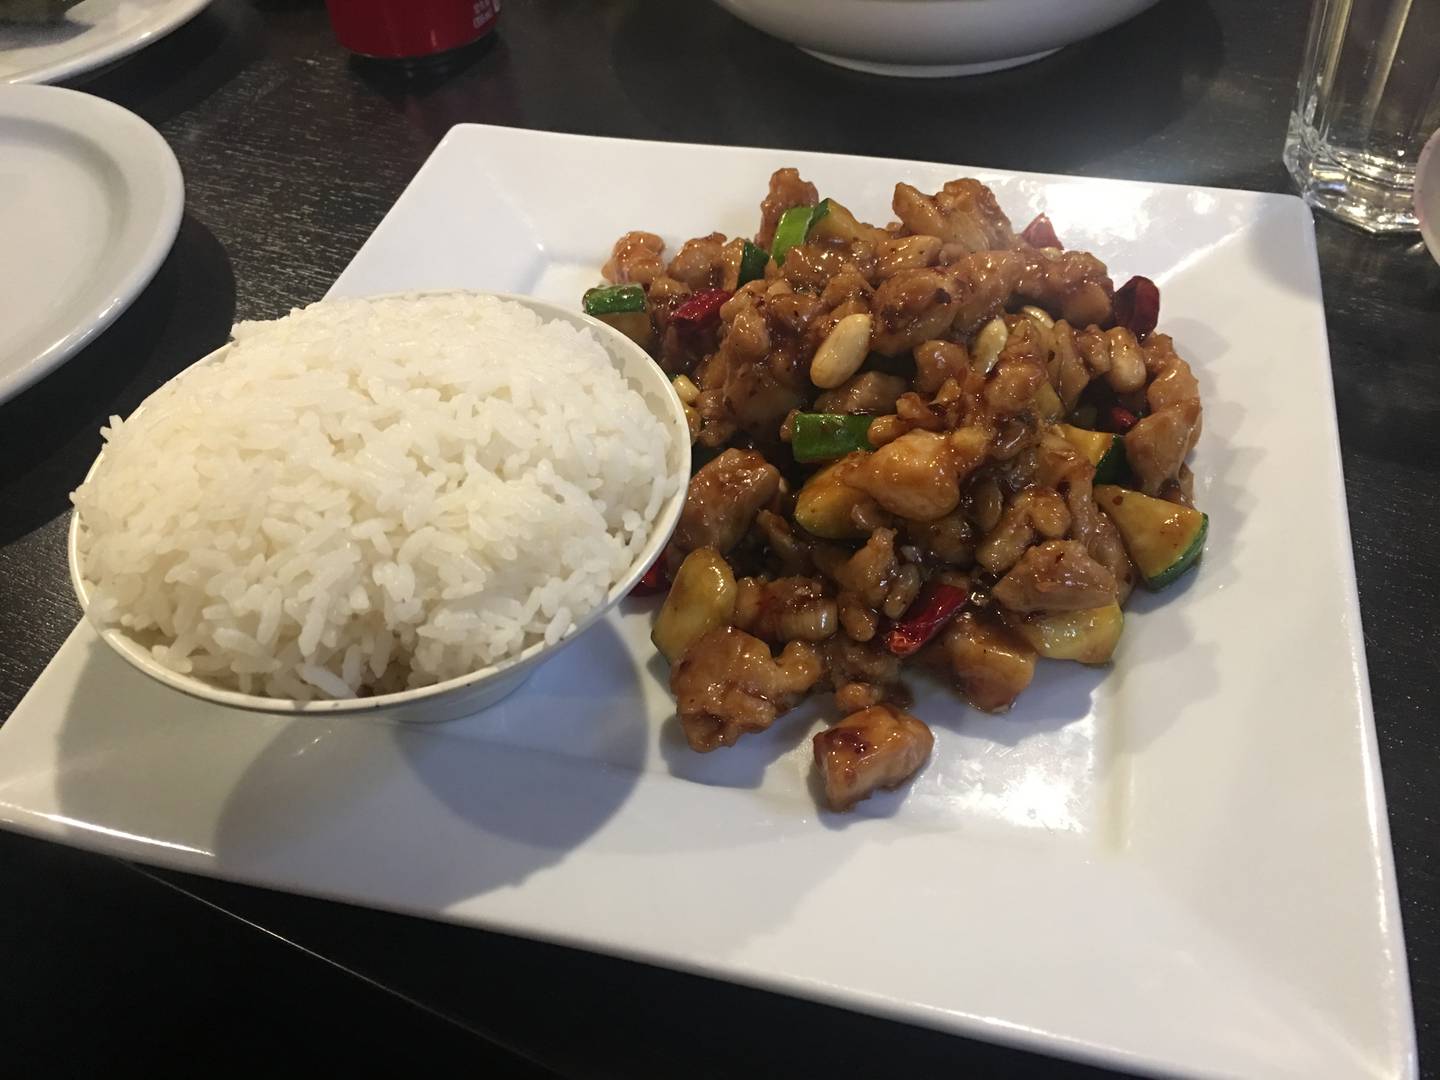 Kung Pao lunch special at Jimmy's Asian Food restaurant in Anchorage.